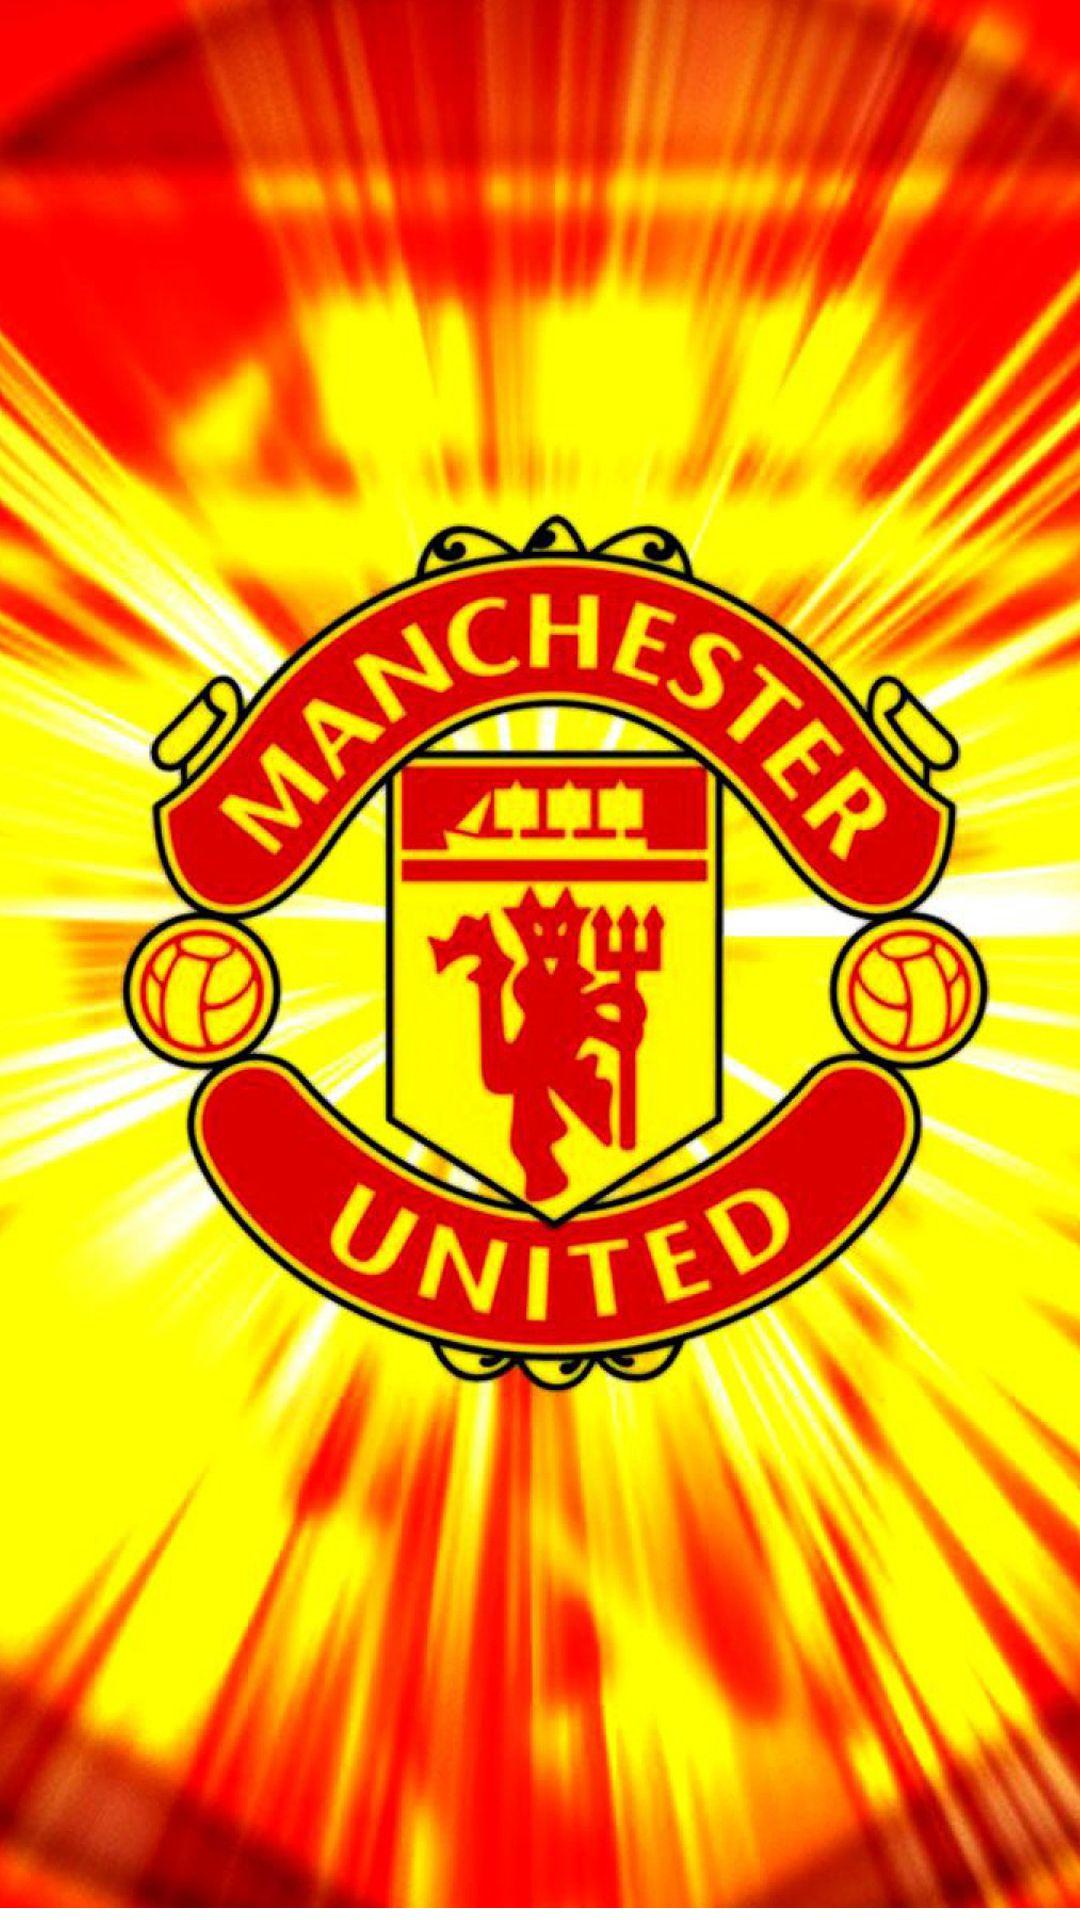 Apple iPhone 6 Plus HD Wallpaper United in with red and yellow background #a. Manchester united, Manchester united wallpaper, Manchester united logo